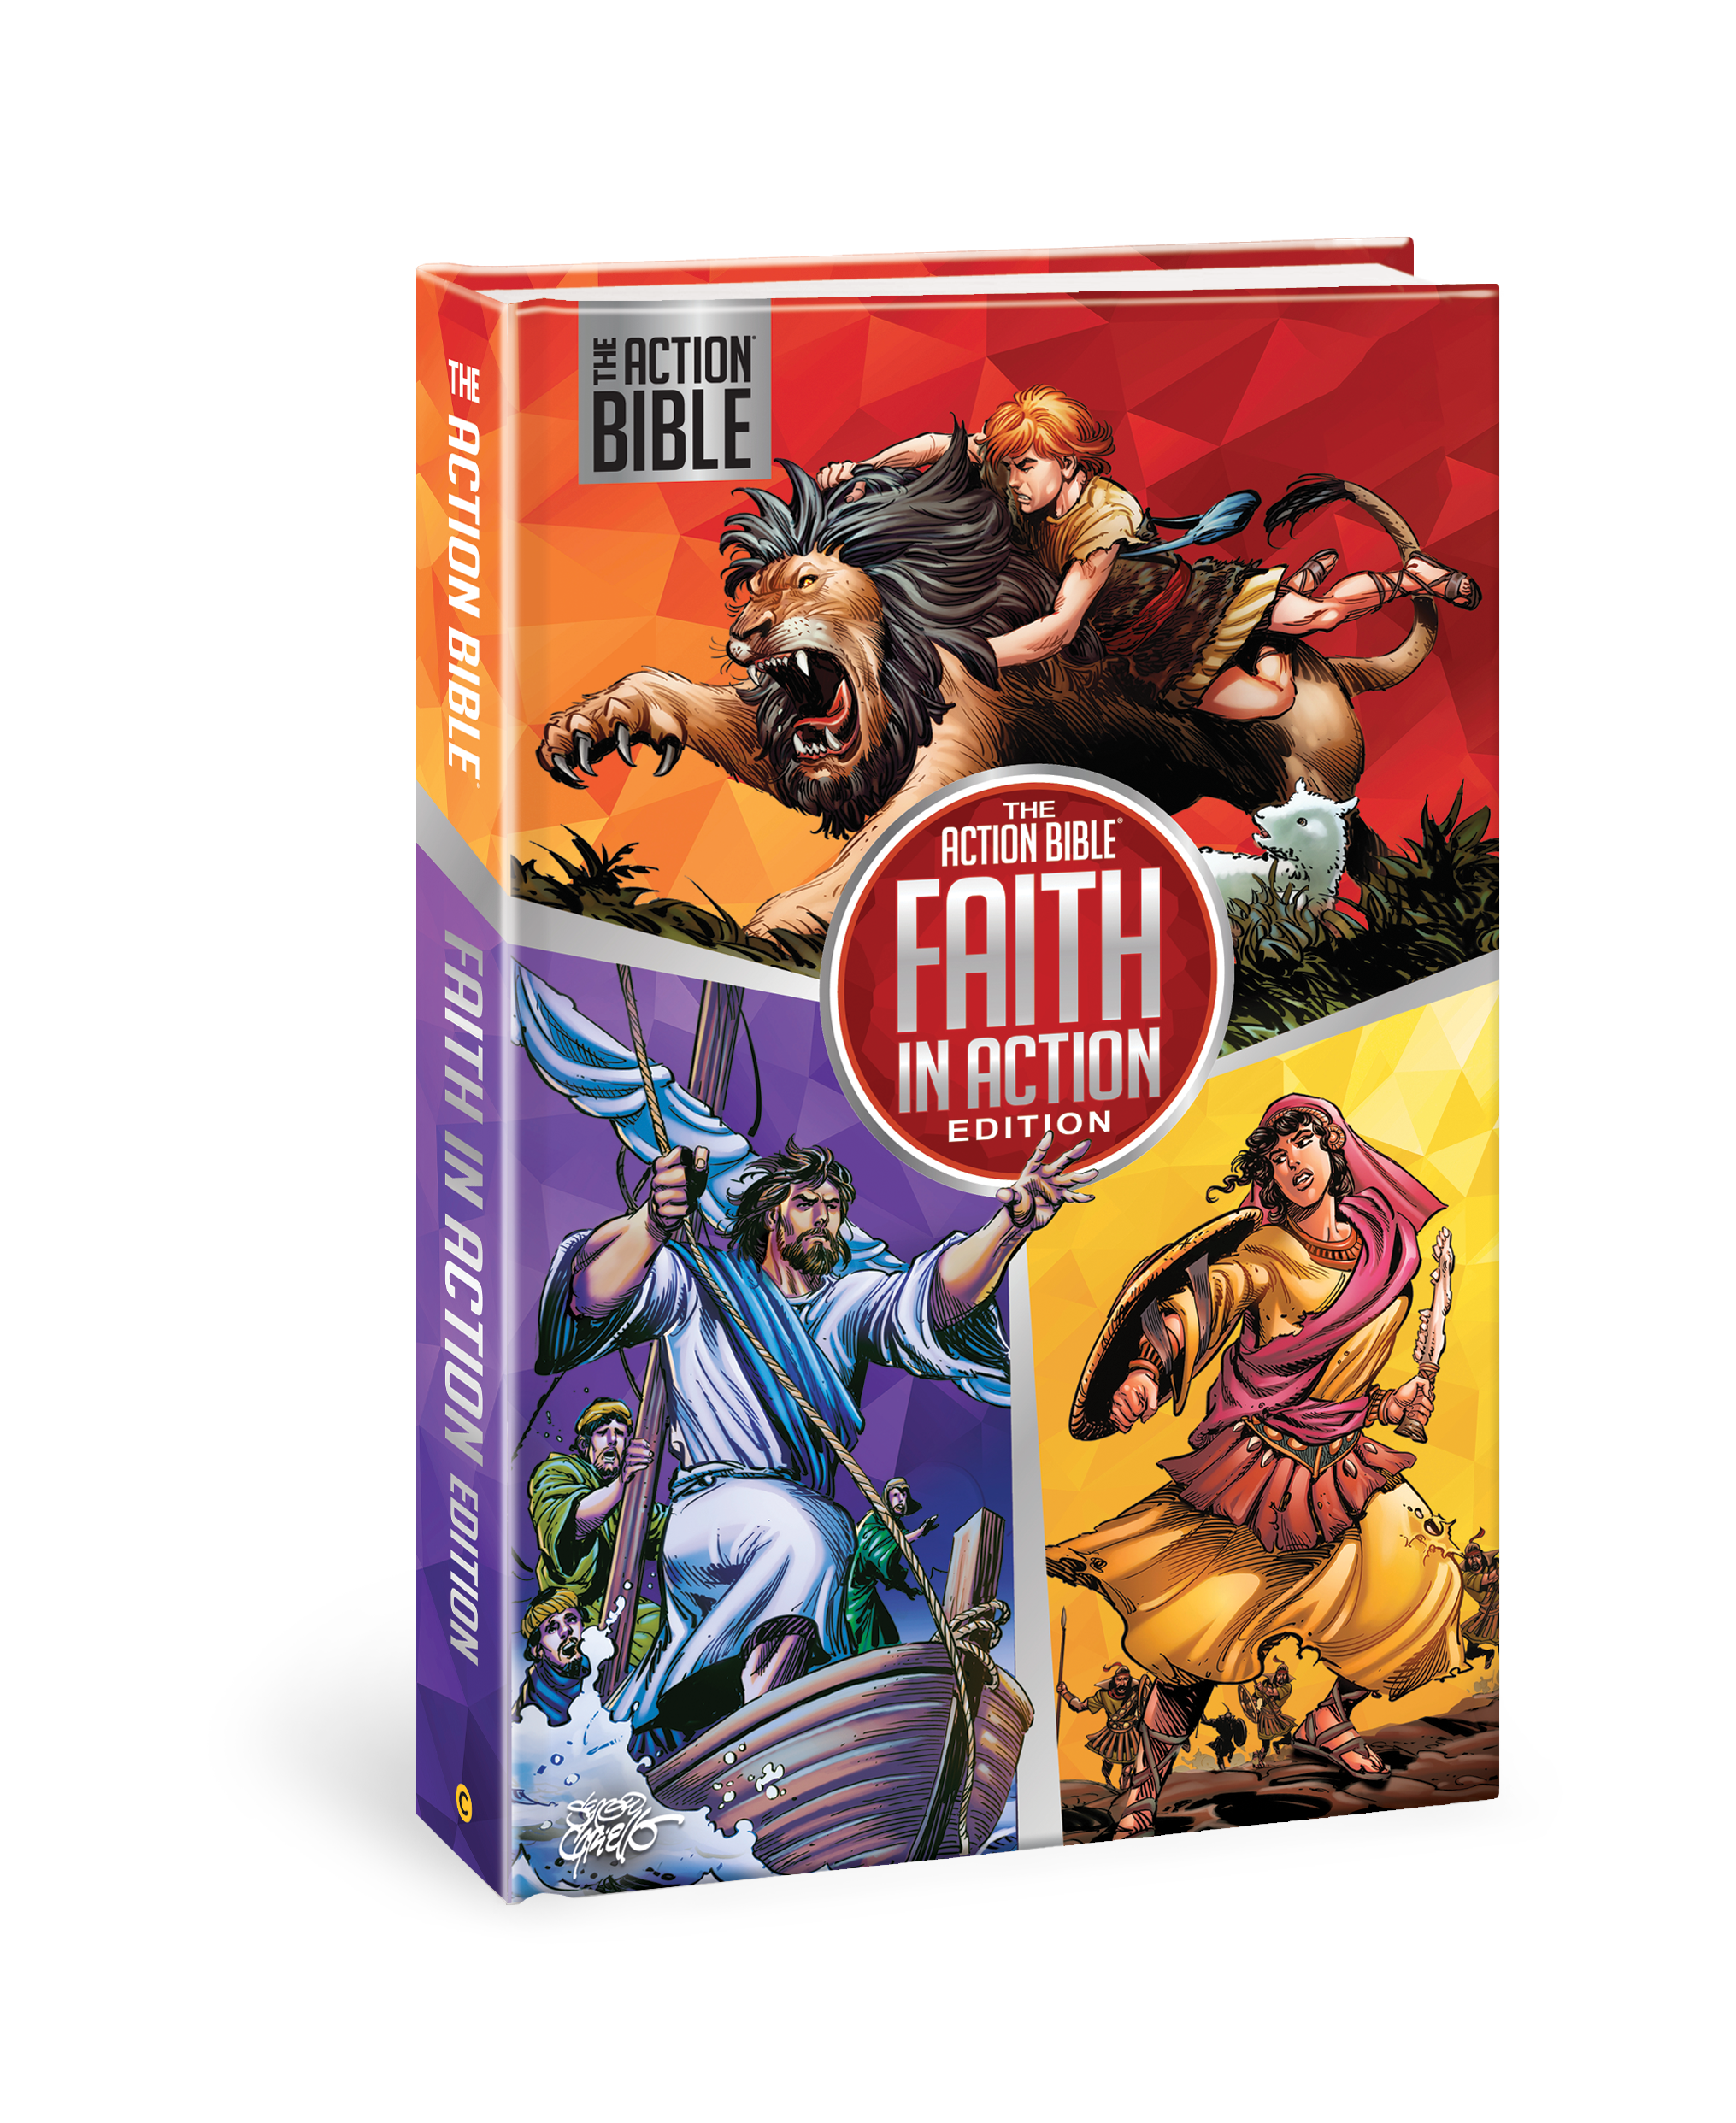 Parents, order your copy of the The Action Bible: Faith in Action Edition today!